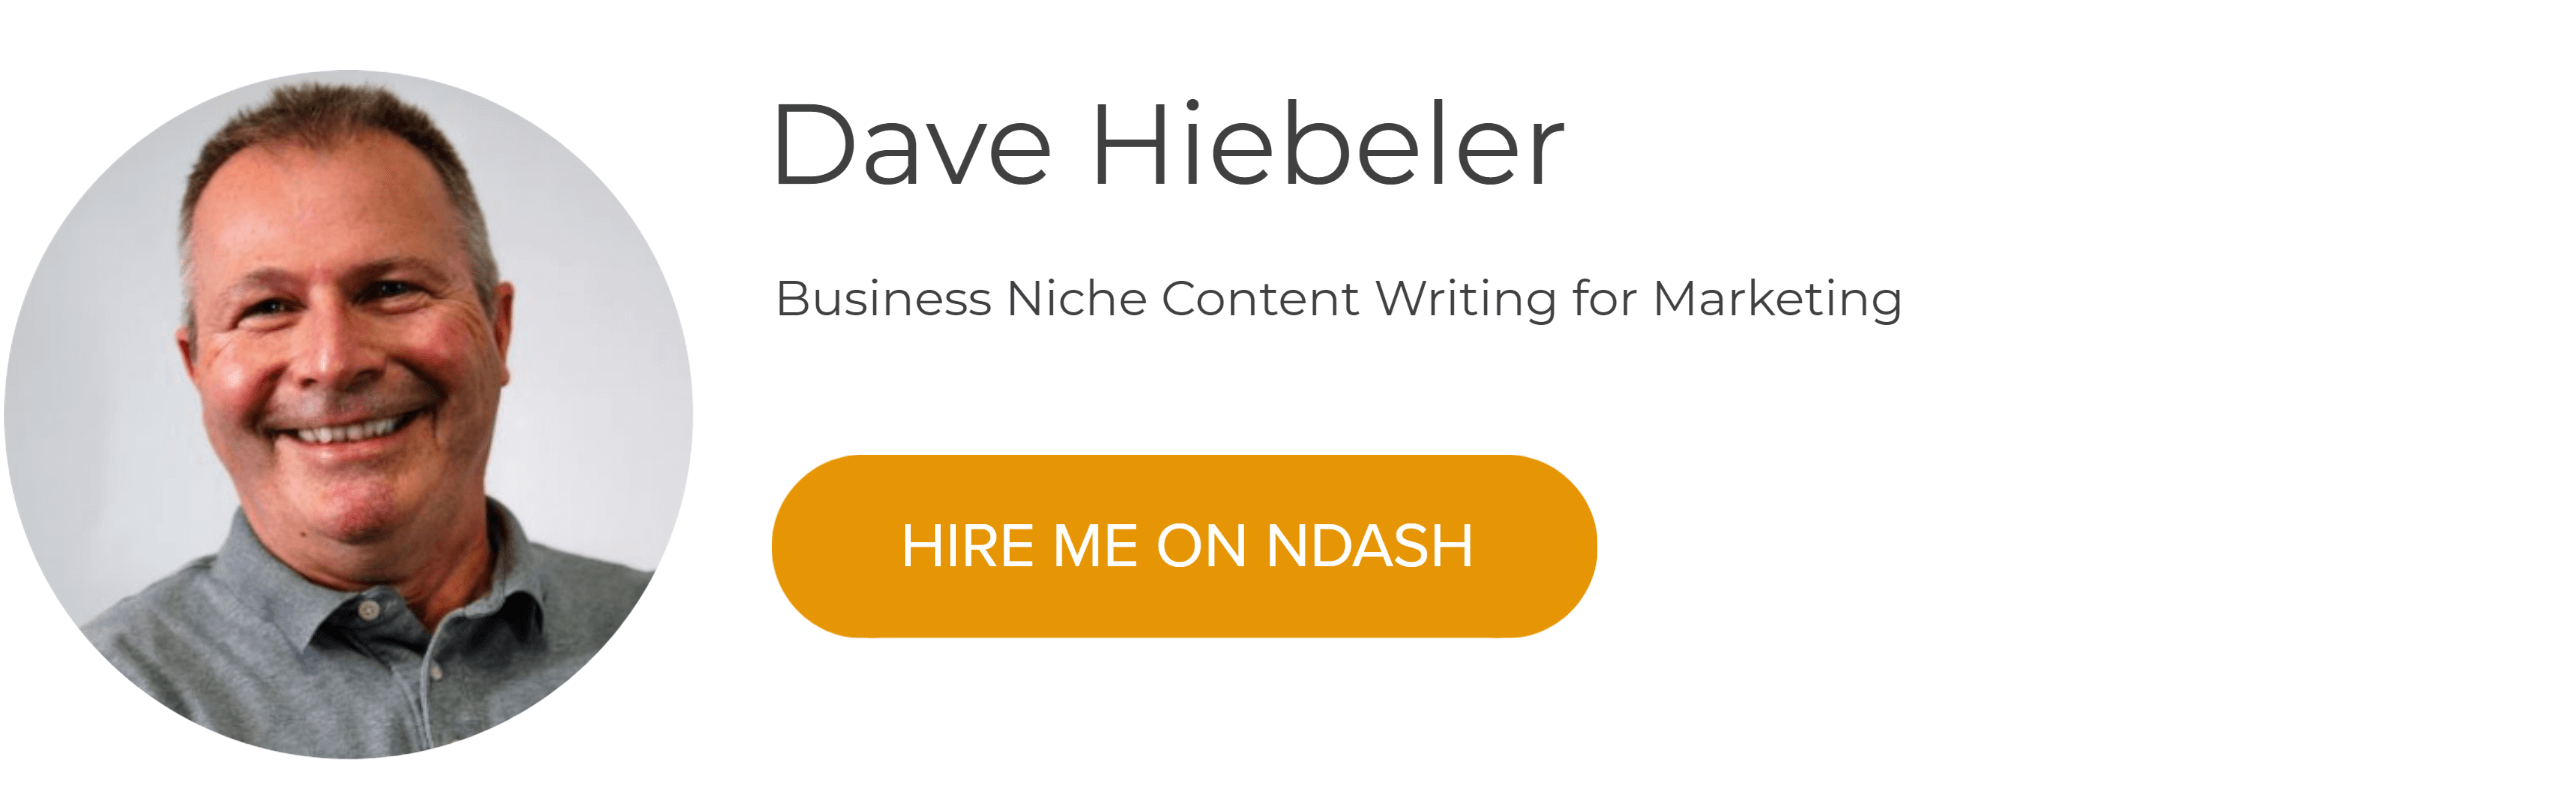 Wednesday Writer Roundup: Dave Hiebeler, business niche content writing for marketing